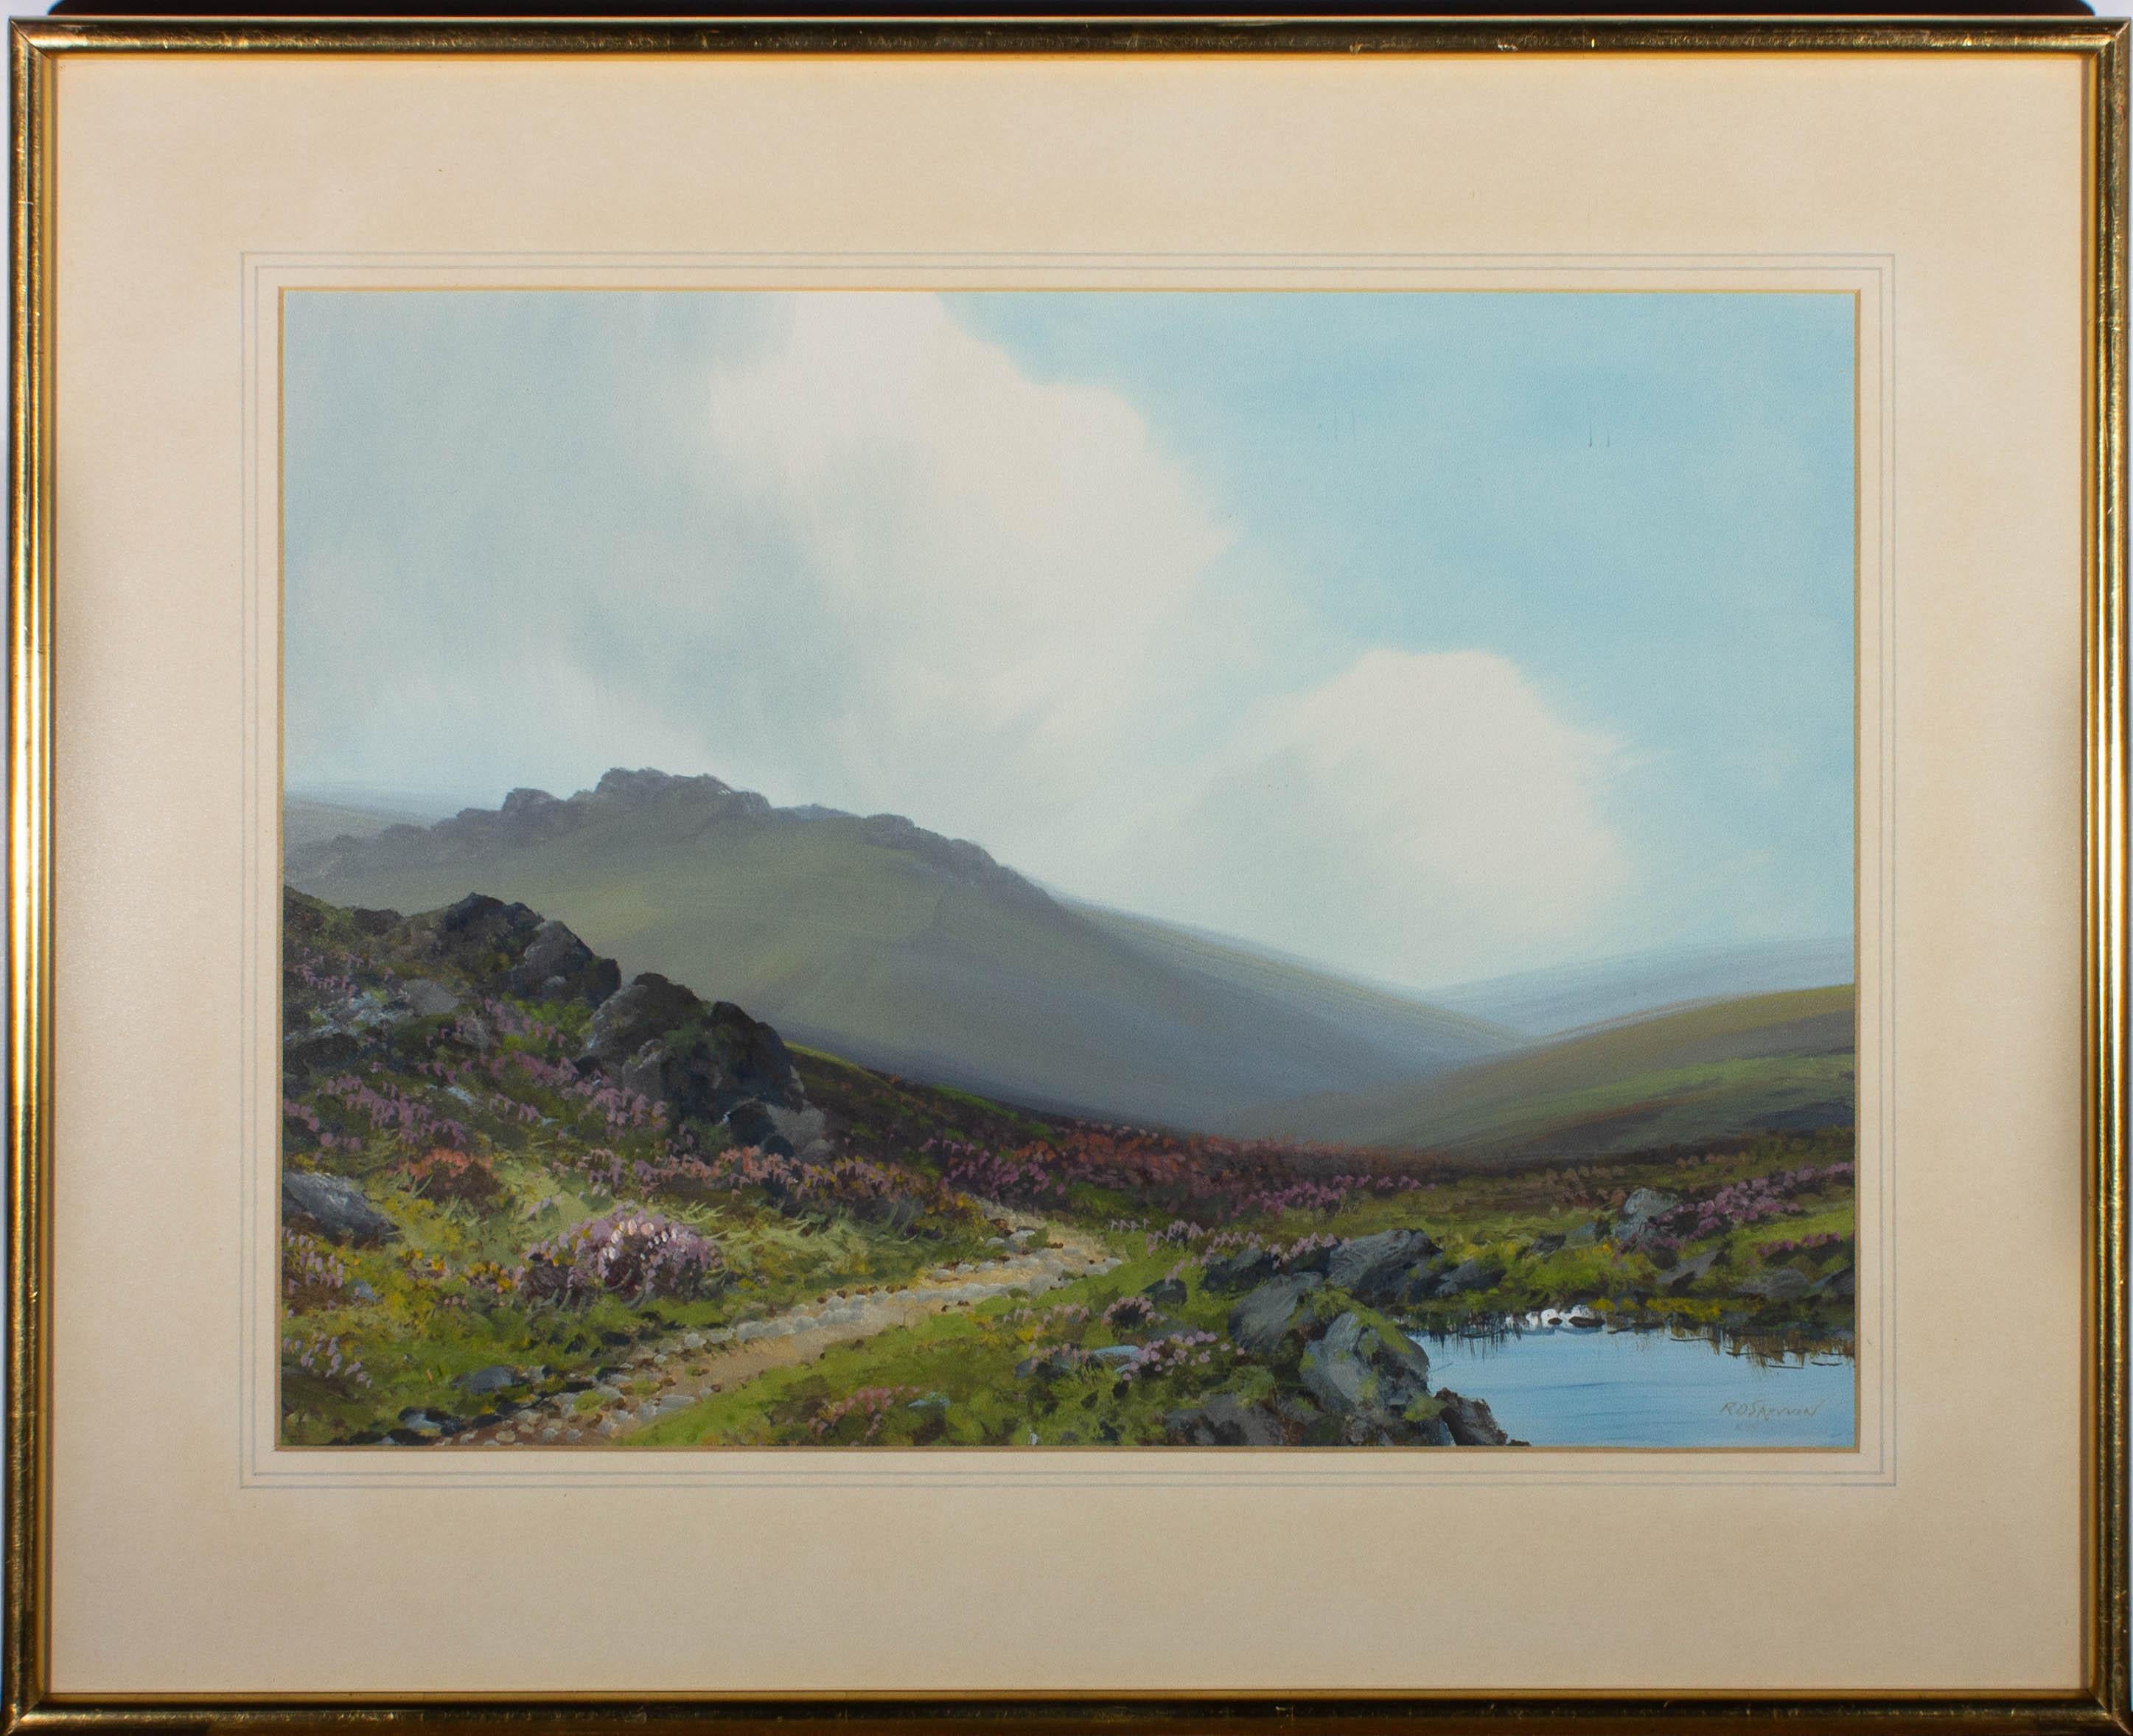 A sweeping view across the dramatic Dartmoor landscape. Presented glazed in a beige mount and a distressed gilt-effect wooden frame. Signed to the lower-right edge. On board.
